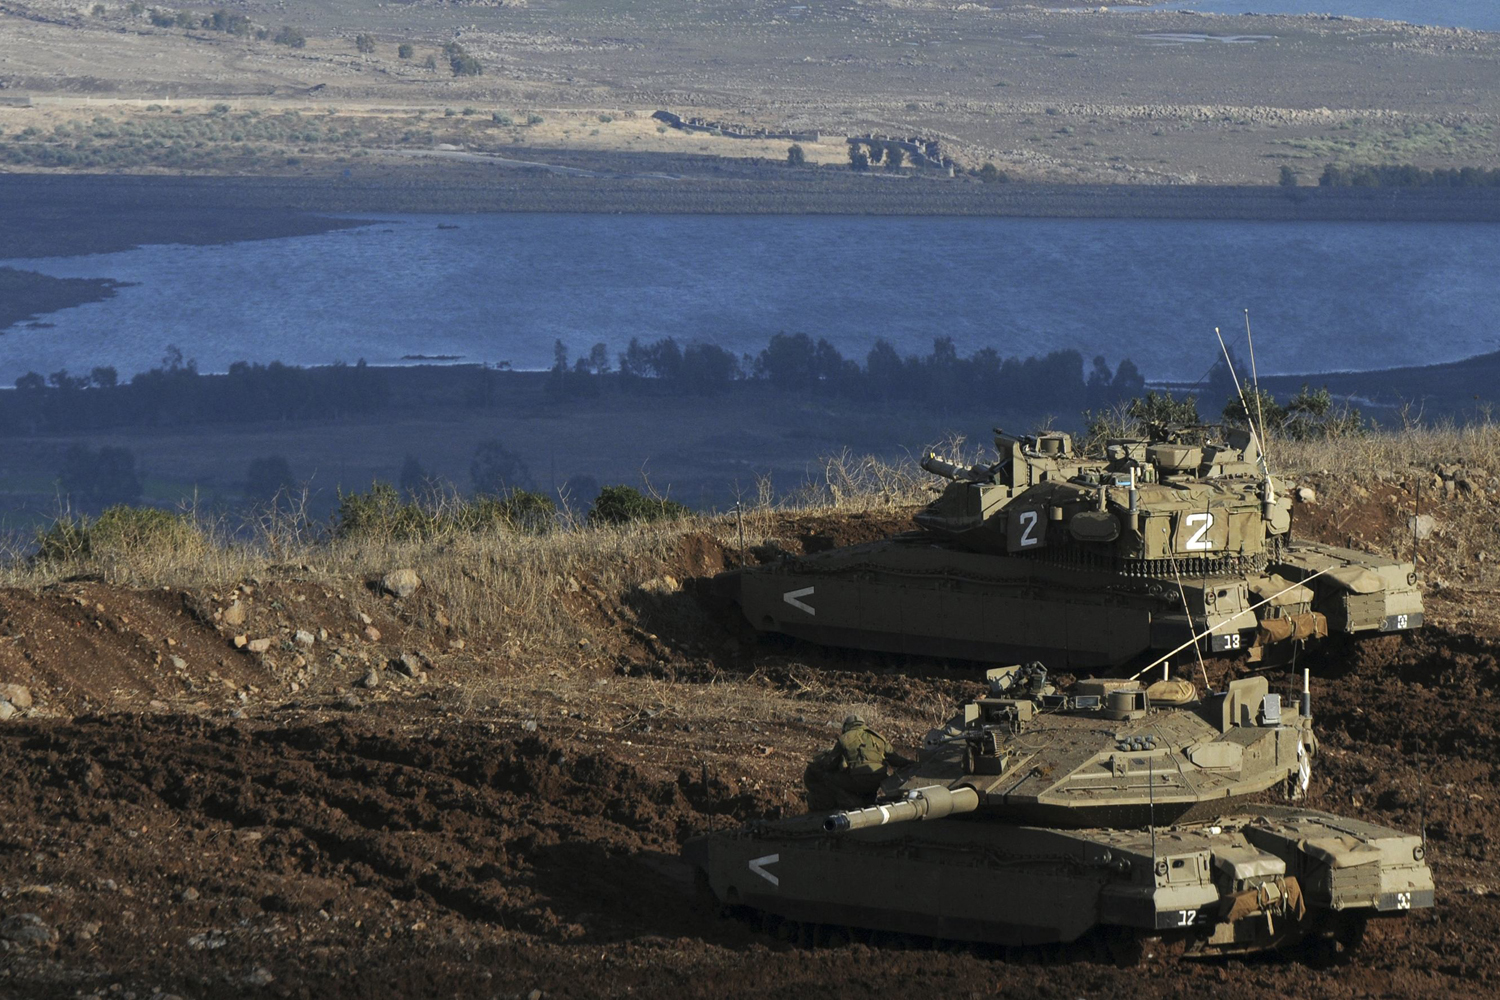 Image: Nov. 12, 2012. Israeli tanks stand in position overlooking a Syrian village from the Israeli-occupied Golan Heights.